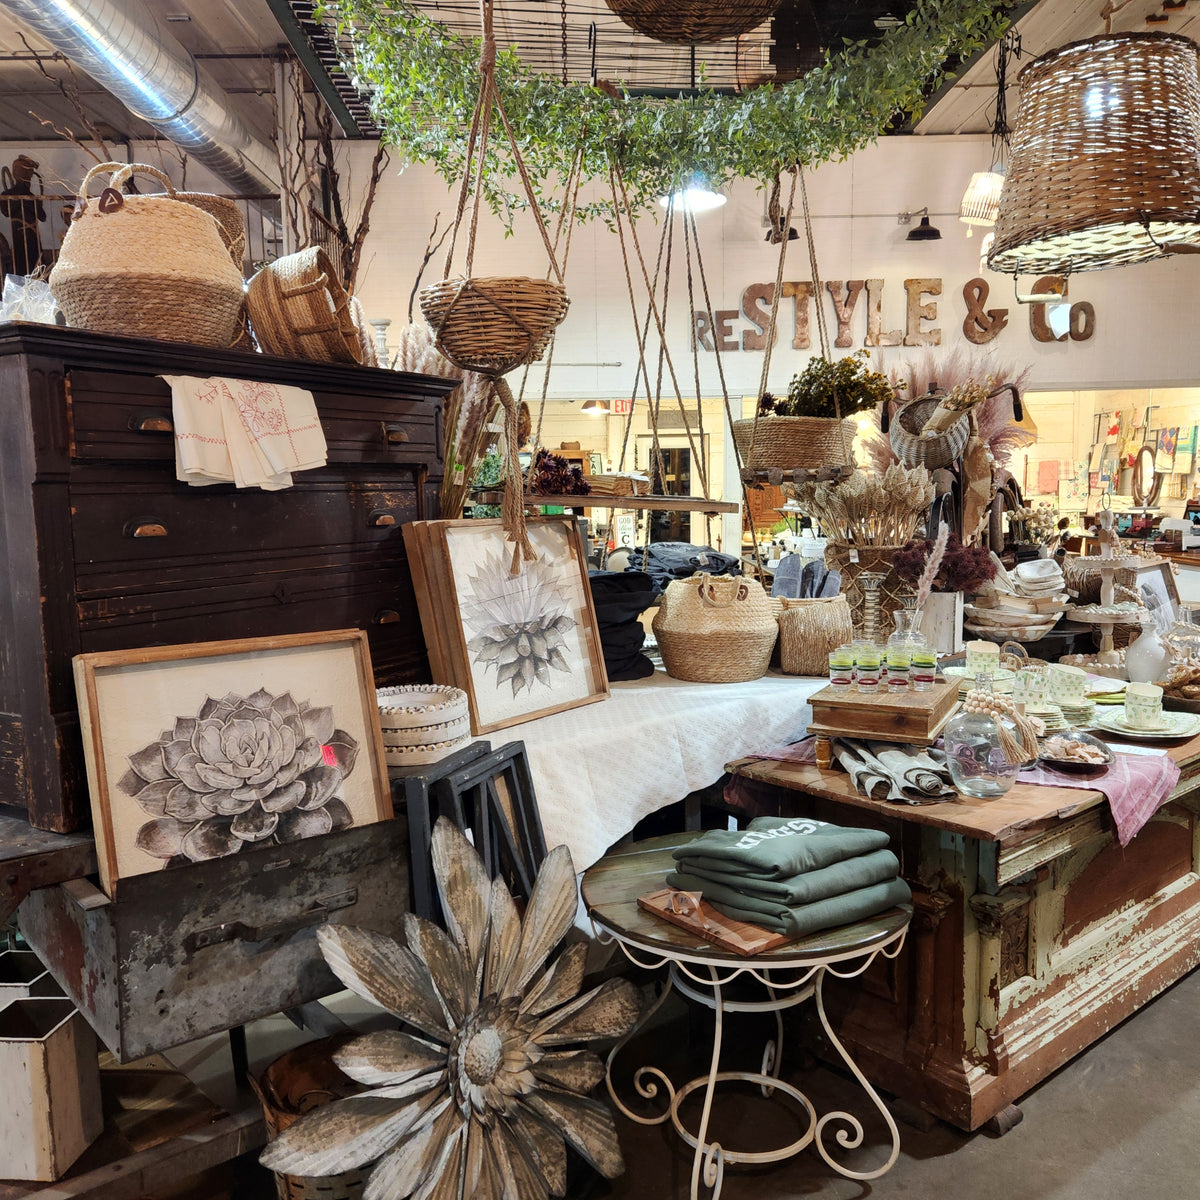 Home decor, florals, baskets, furniture in ReStyle Pole Shed